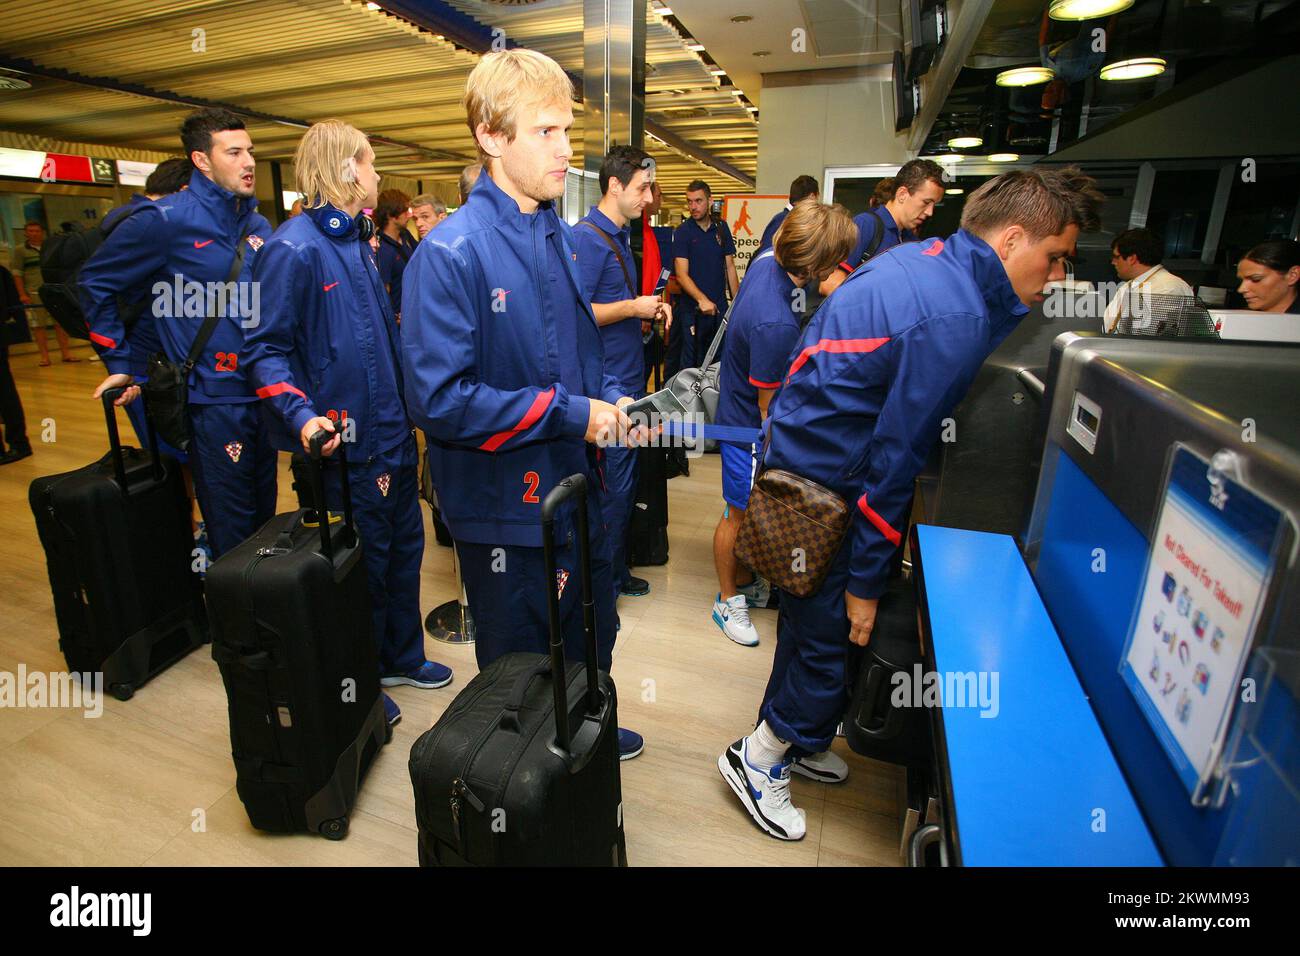 10.09.2012., Zagreb, Croatia - From Zagreb Airport, Croatia football team flew to Belgium because of the qualifying match for the World Cup in Brazil 2014. Ognjen Vukojevic. Photo: Tomislav Miletic/PIXSELL  Stock Photo